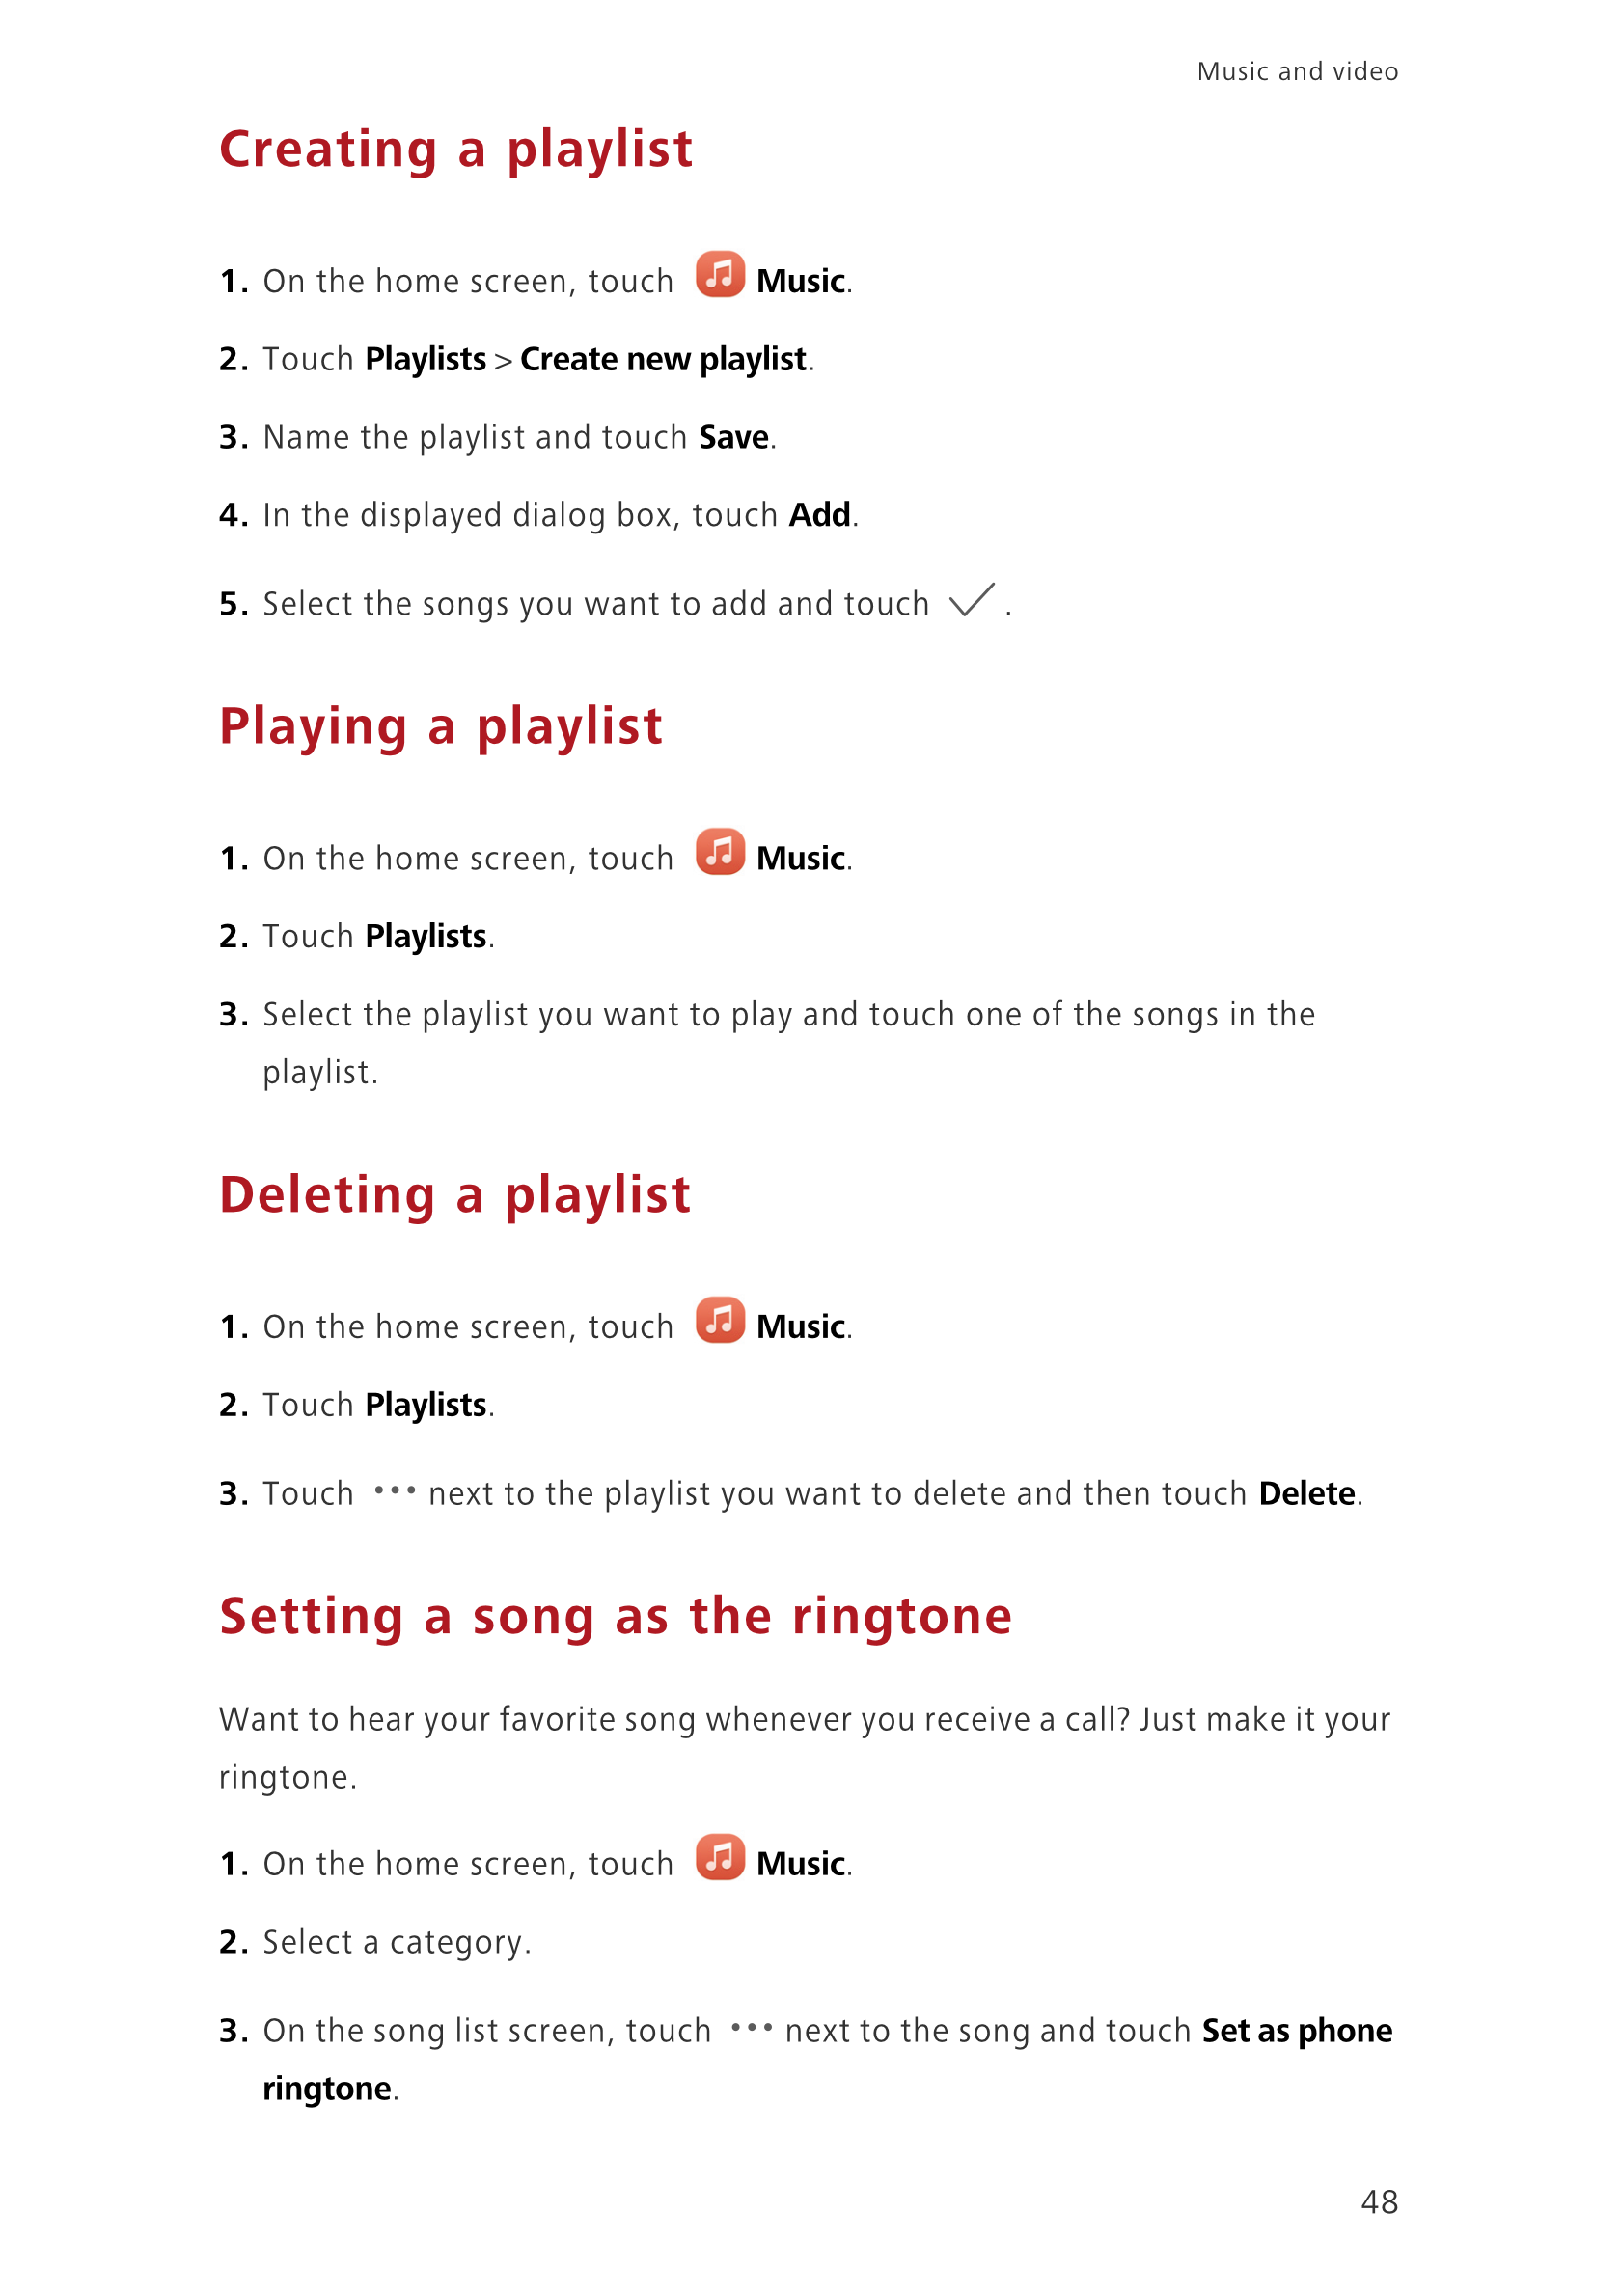 Music and video  
Creating a playlist
1.  On the home screen, touch  Music.
2.  Touch  Playlists >  Create new playlist. 
3.  Na